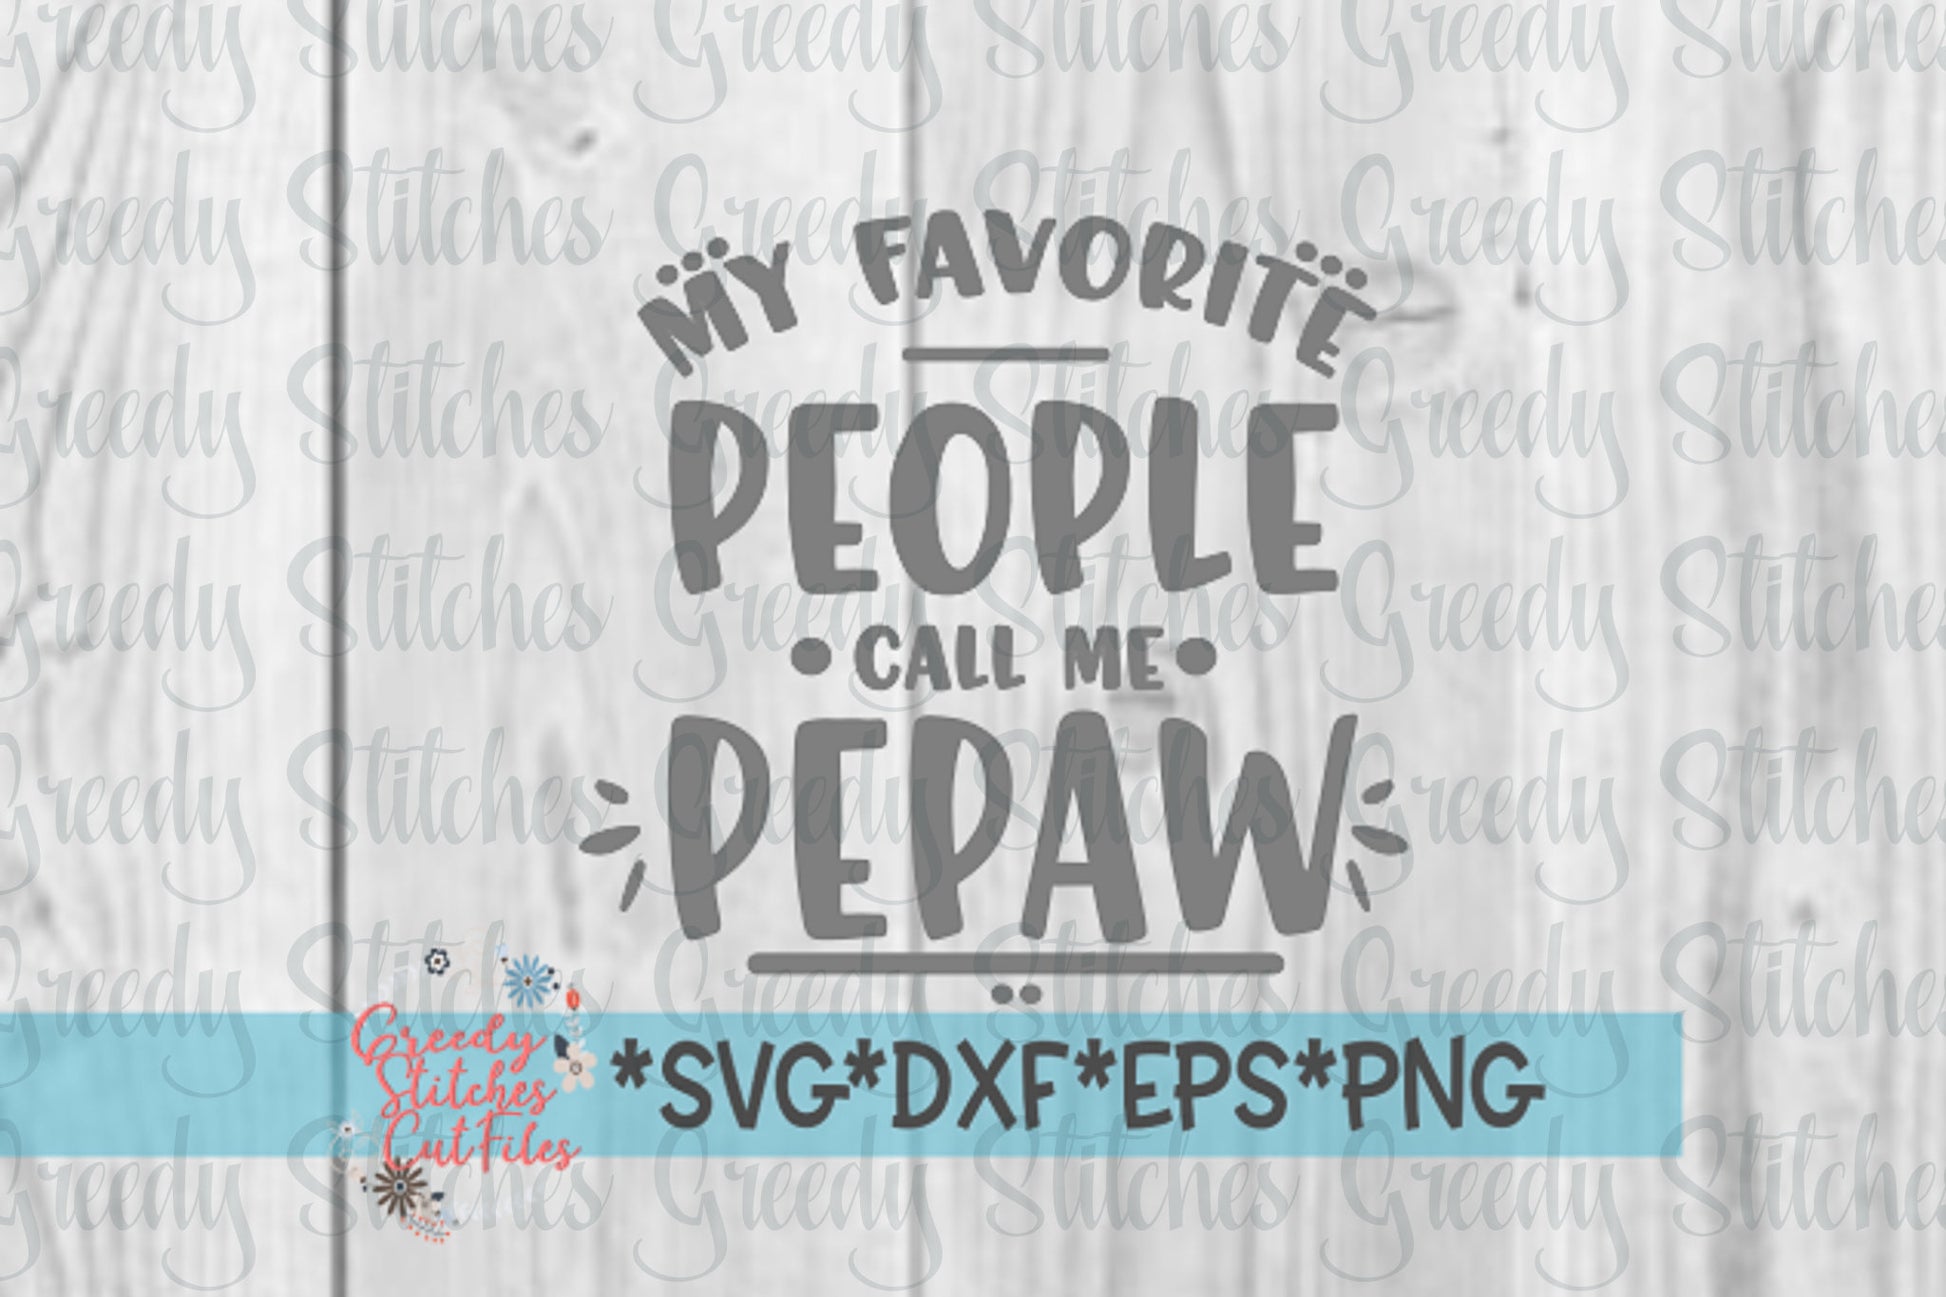 Father&#39;s Day SVG | My Favorite People Call Me Pepaw SVG | Pepaw svg, dxf, eps, png | Father&#39;s Day Pepaw SvG | Instant Download Cut File